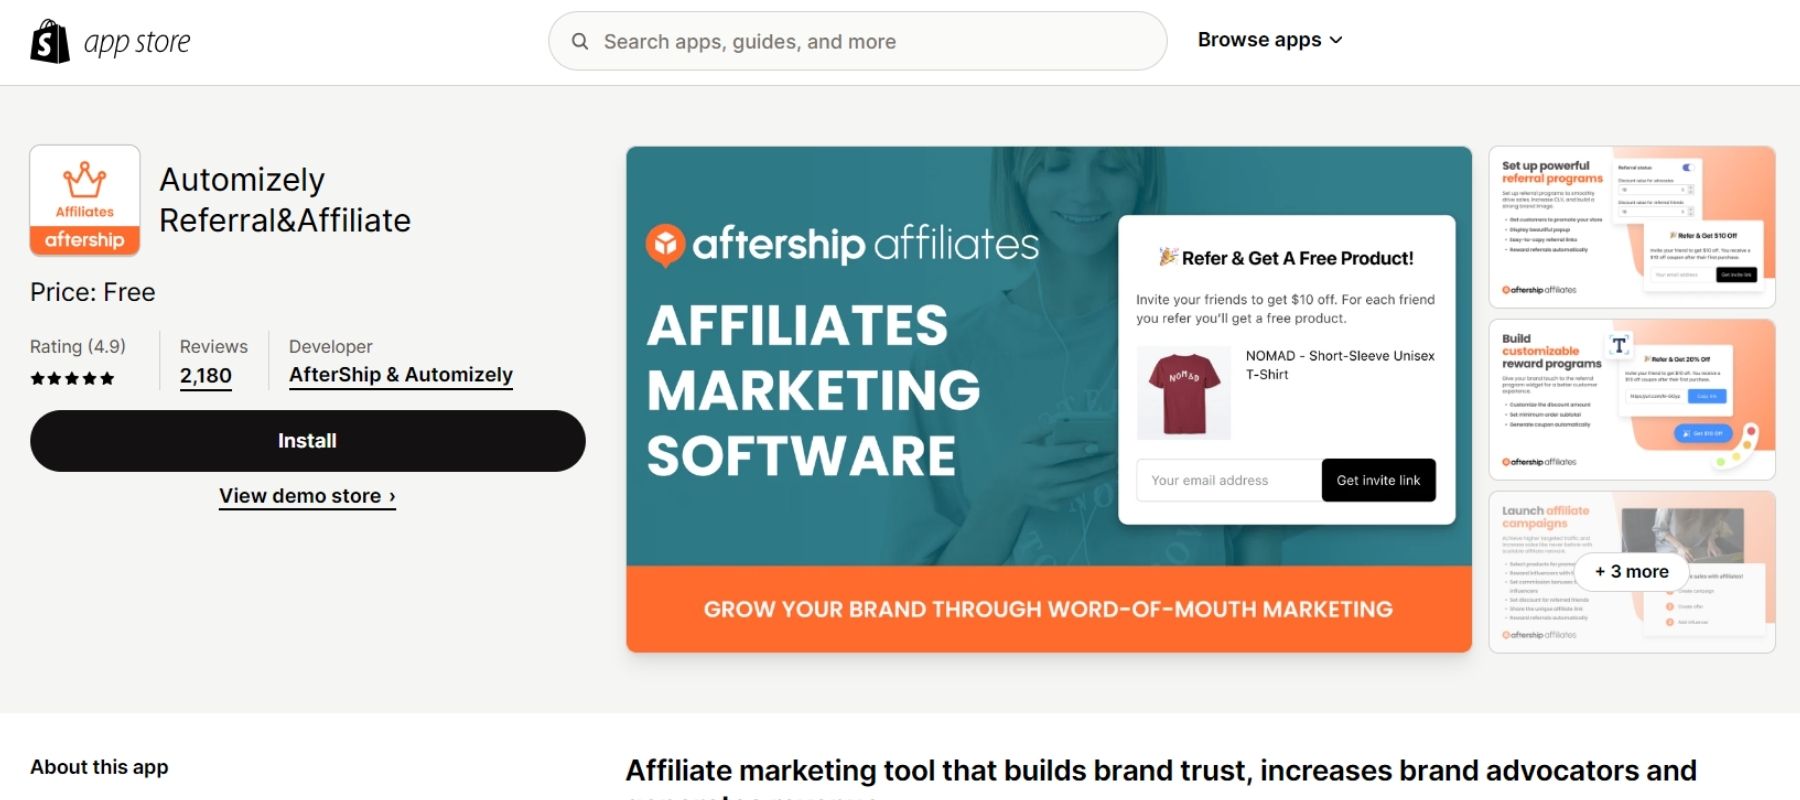 Automizely Referral & Affiliate